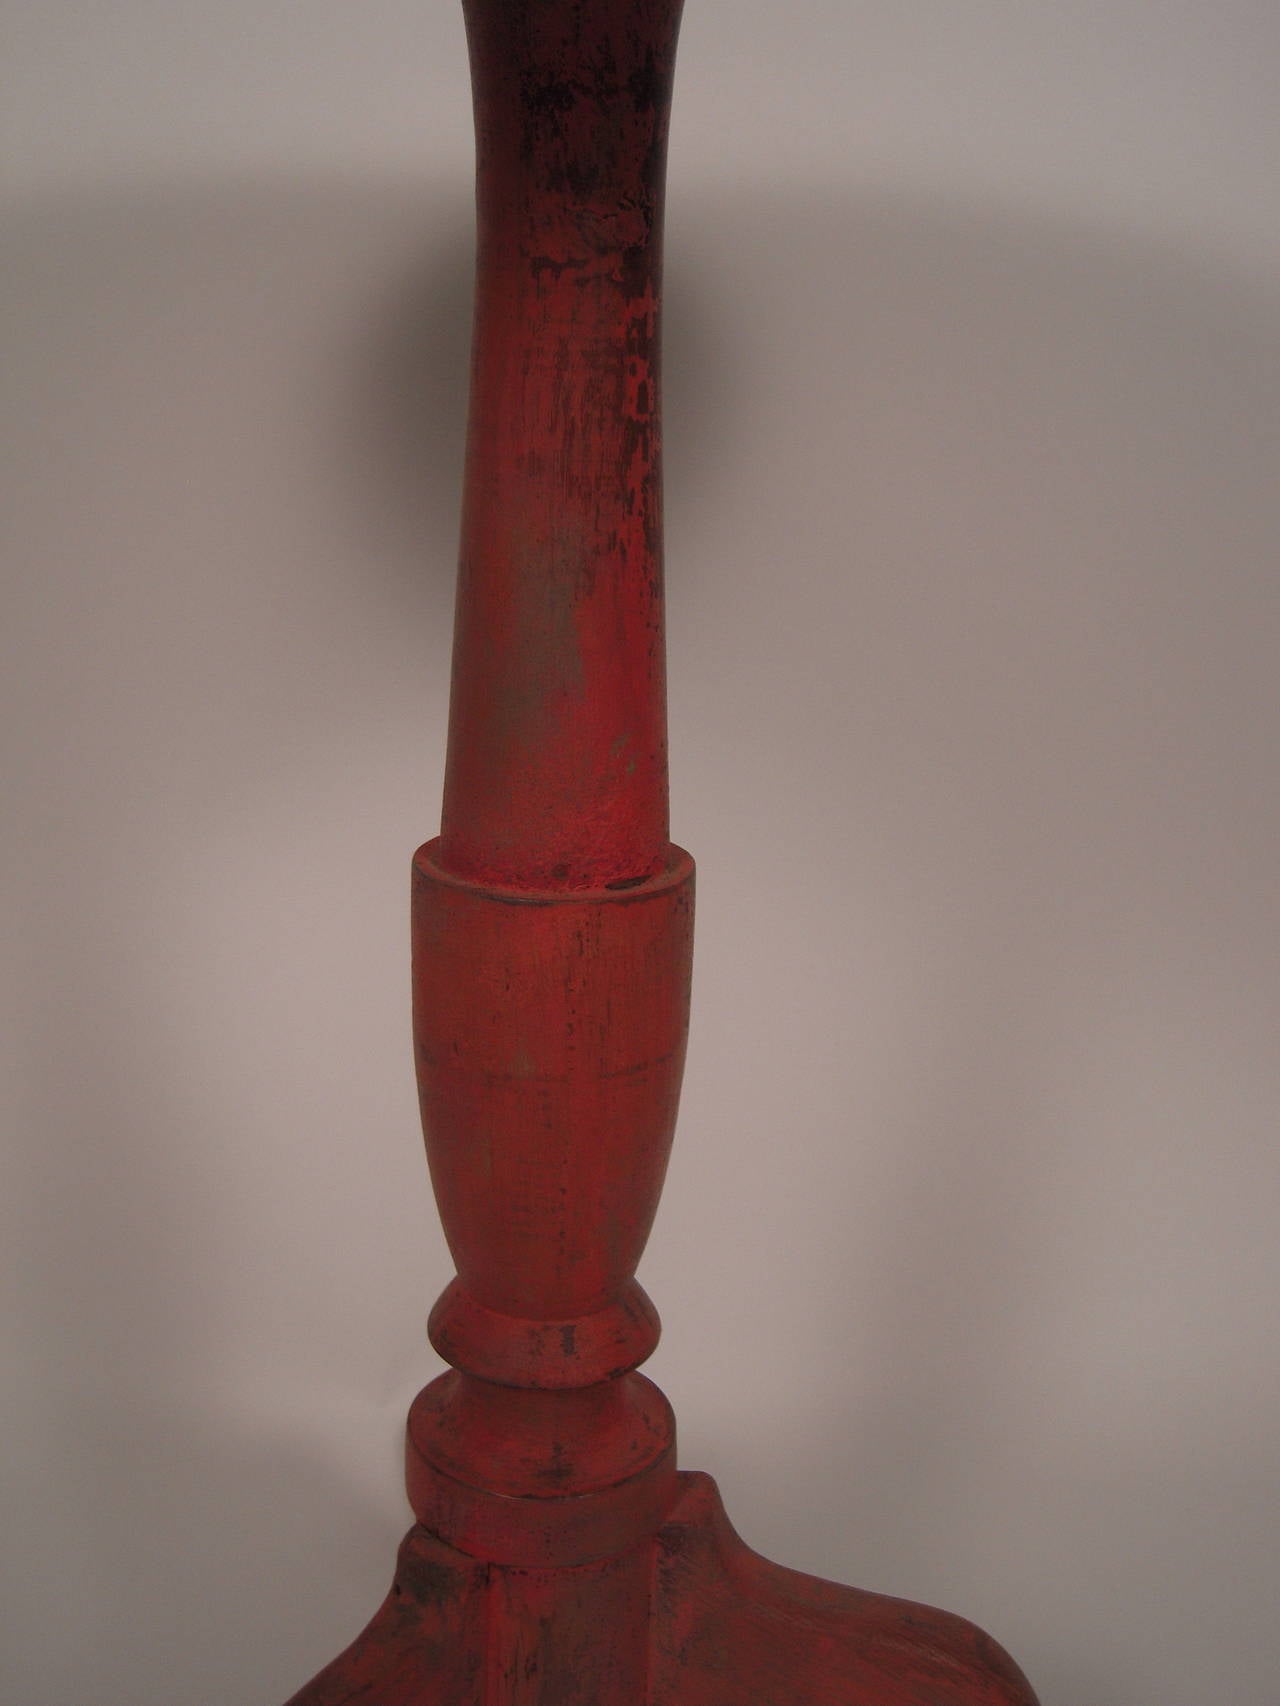 Wood Beautifully Colored Salmon Painted Federal Period Candle Stand, circa 1790